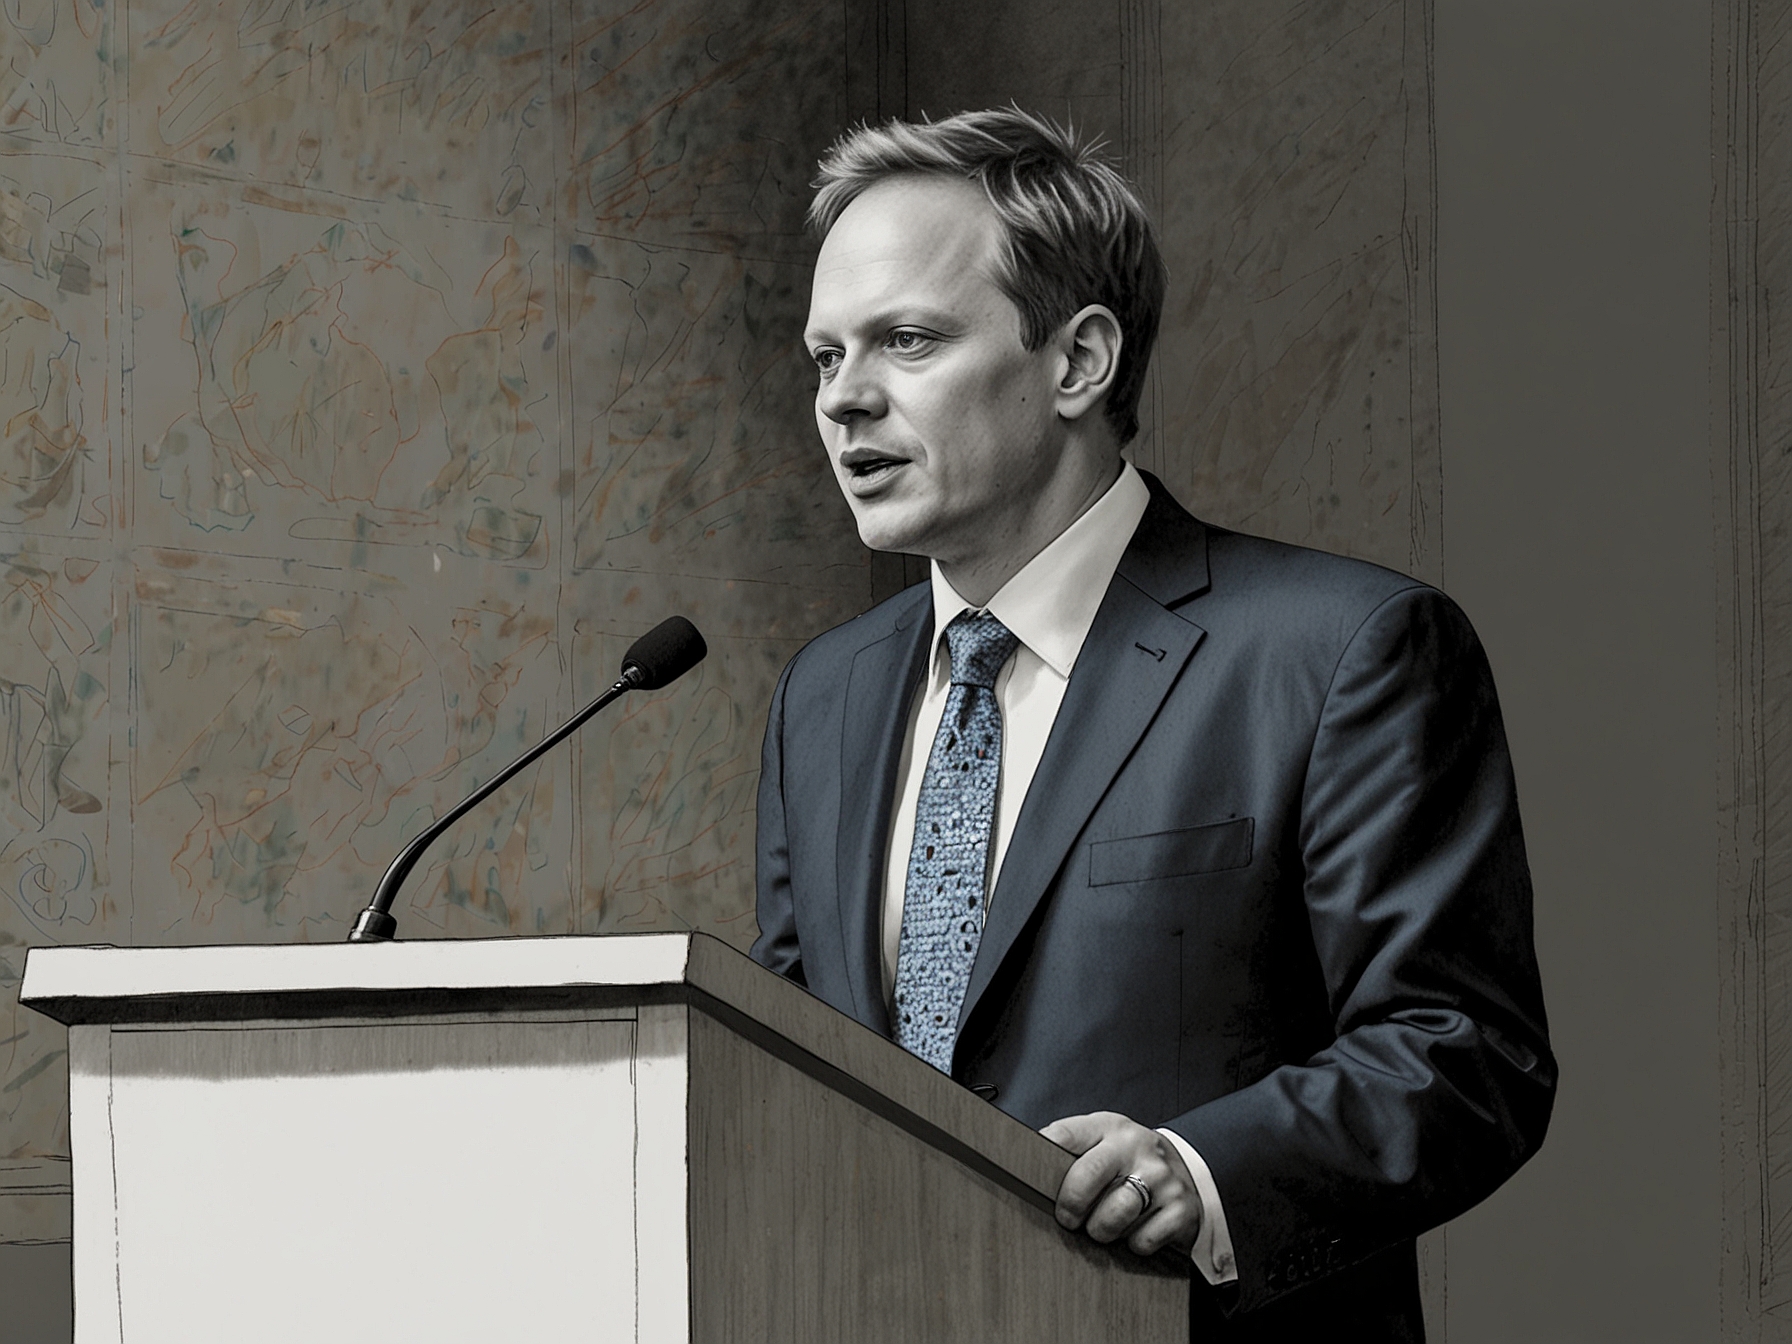 An illustration of UK Defence Secretary Grant Shapps speaking at a podium, emphasizing his concerns about the implications of a potential EU defence pact on Britain's sovereignty.